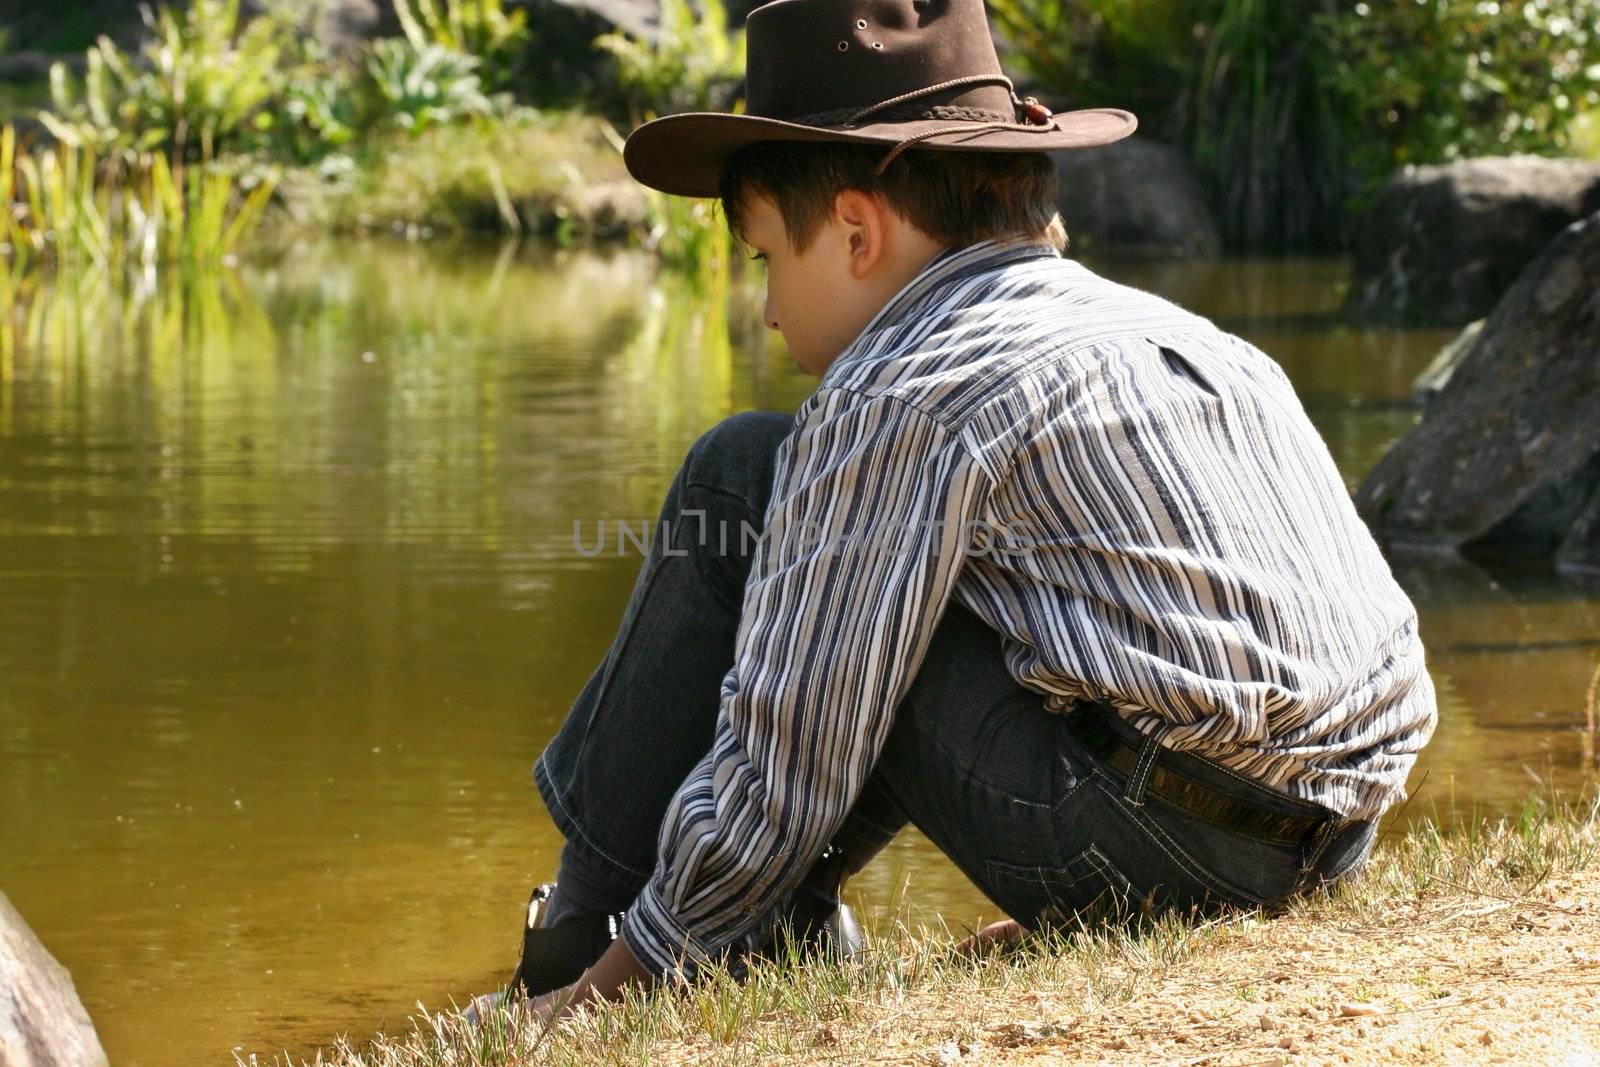 A child wearing jeans, shirt and hat sits quietly by the edge of a pond